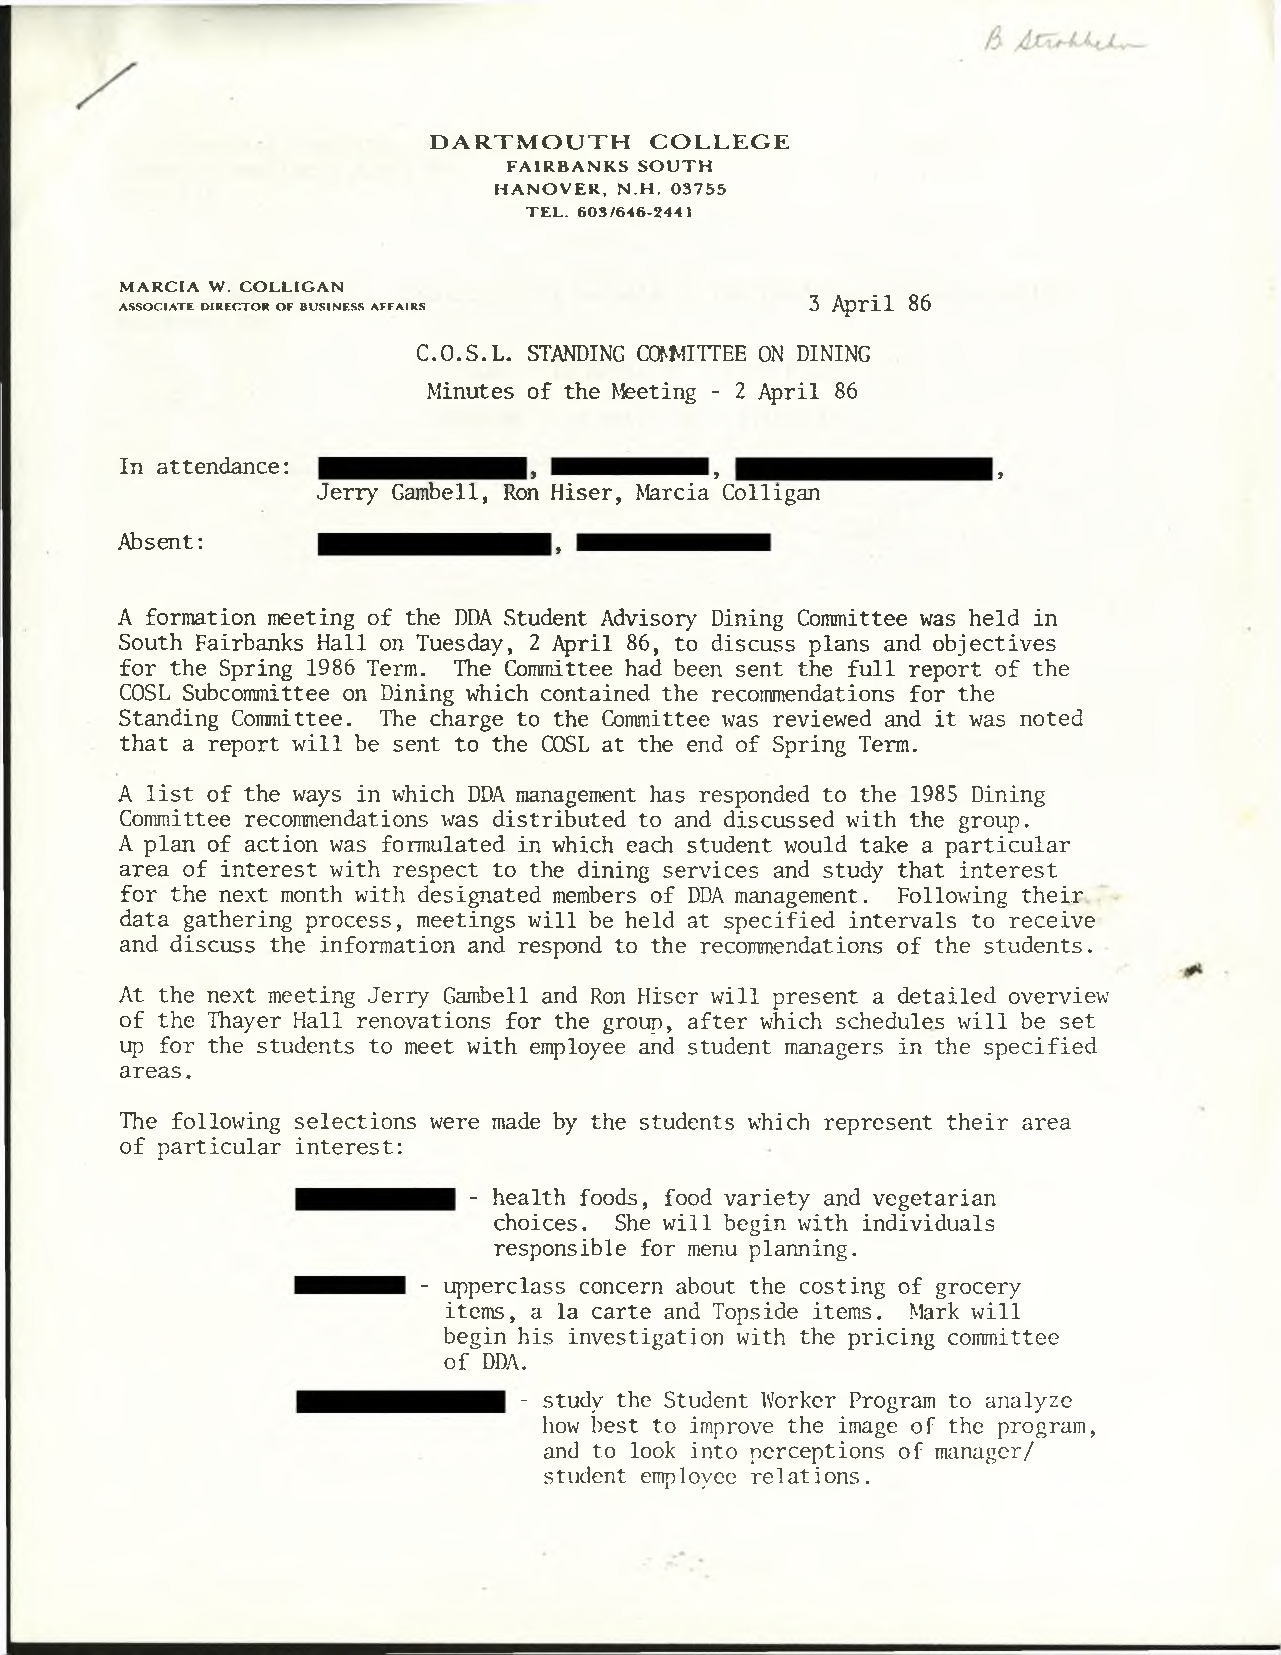 C.O.S.L Standing Committee on Dining Minutes of the Meeting - 2 April 86